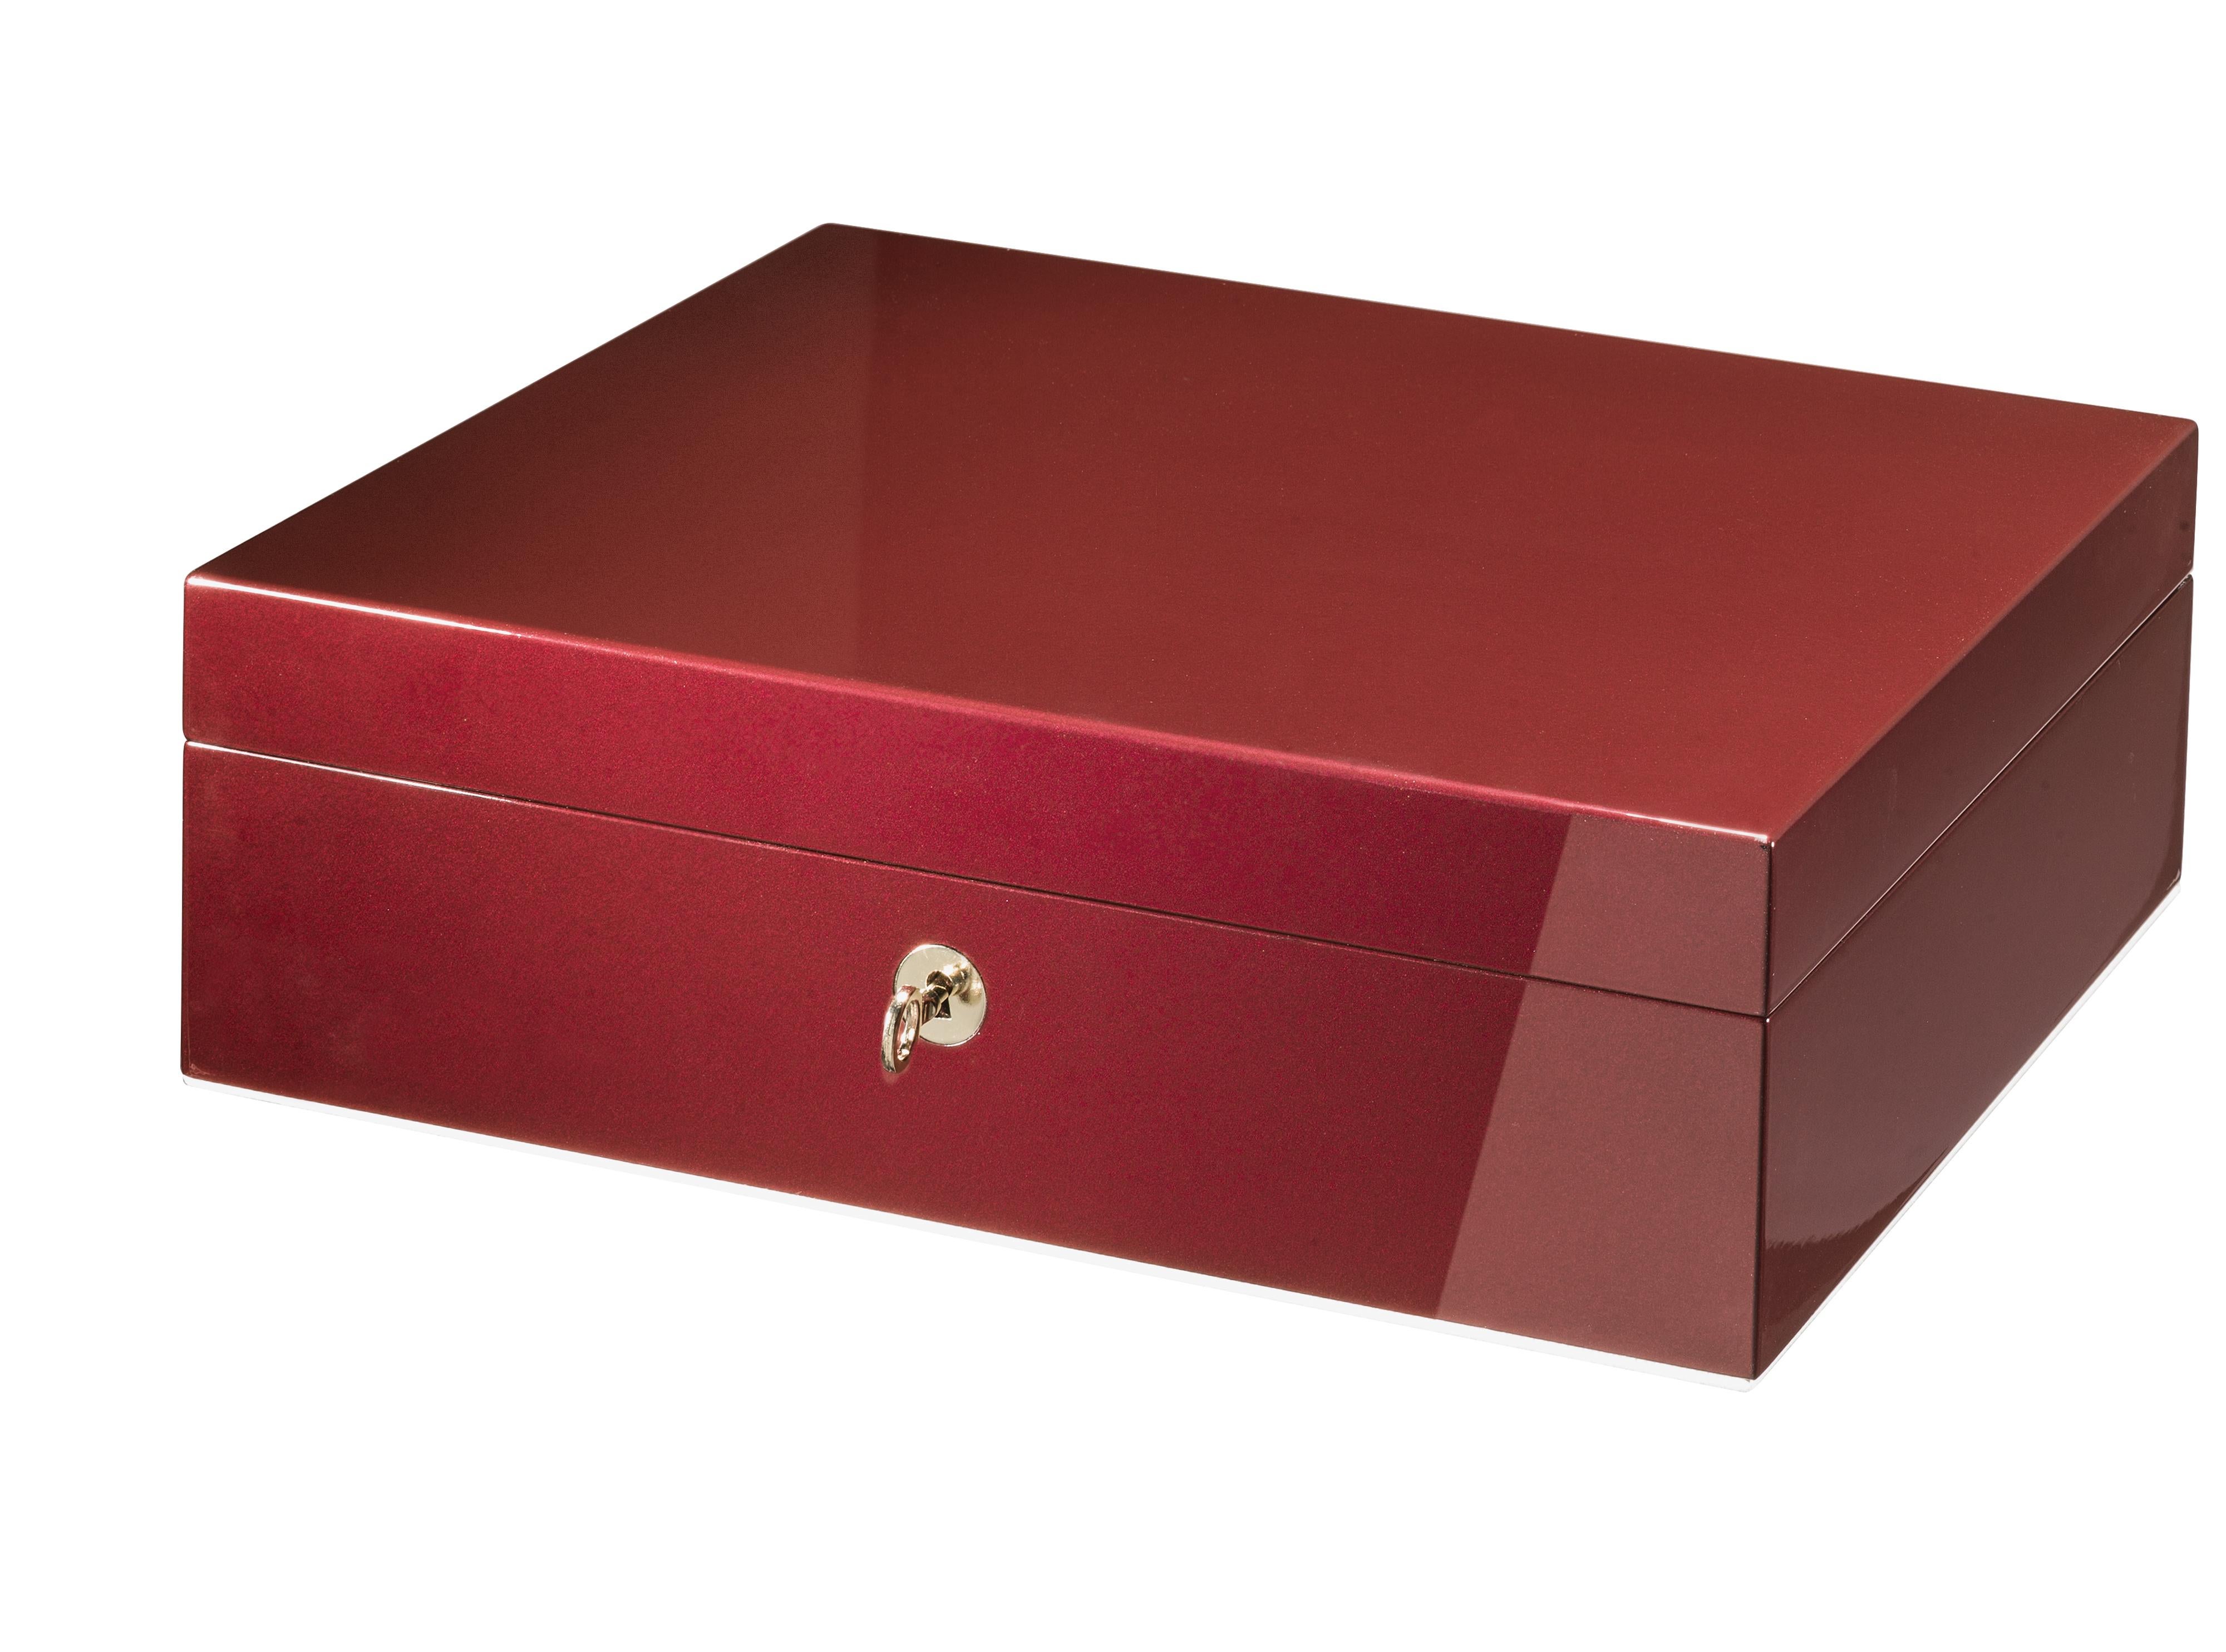 A clean and essential design of sophisticated contemporary flair, this jewelry box is distinguished by a superb ruby color obtained with a brushed and polished polyester finish. Handcrafted of wood, it is enriched with gold-finished metal details